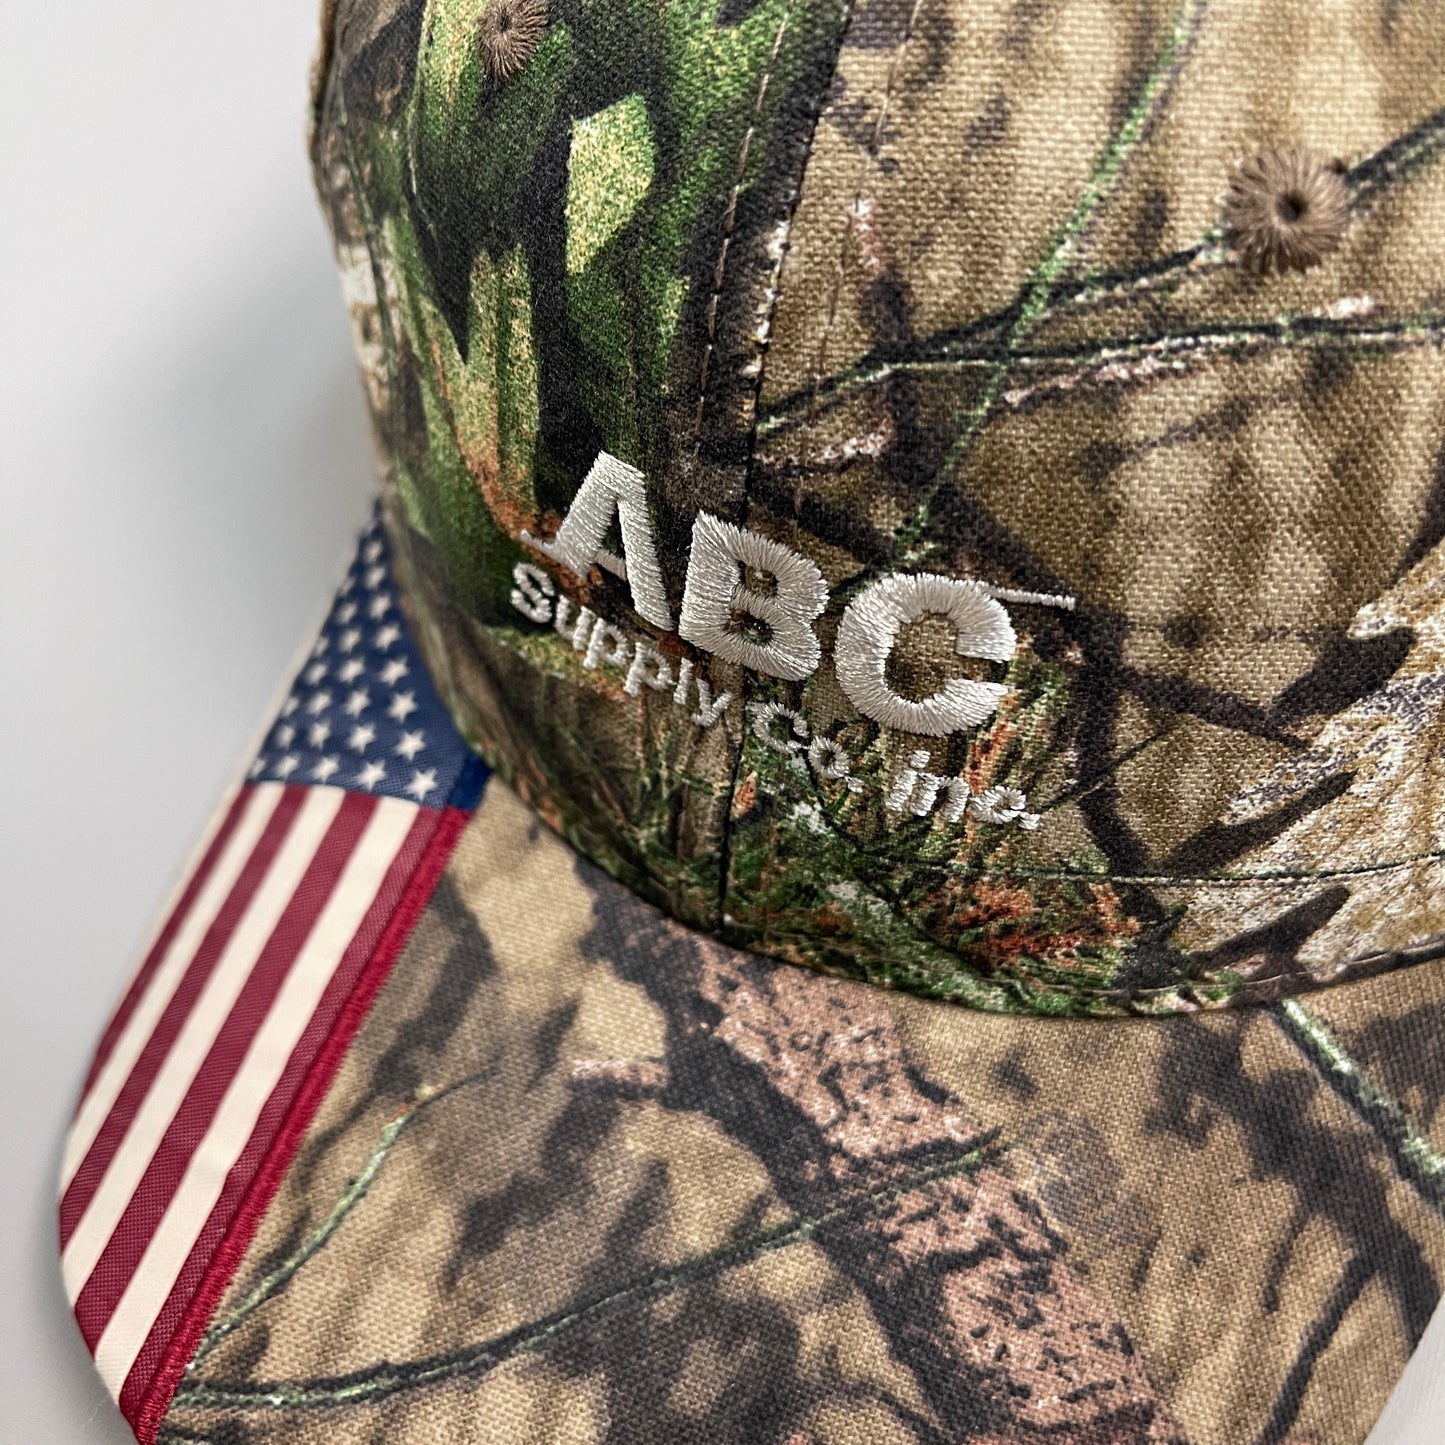 ABC SUPPLY CO Camo American Flag Hat Embroidered Sz Adjustable CWF-305 (New)